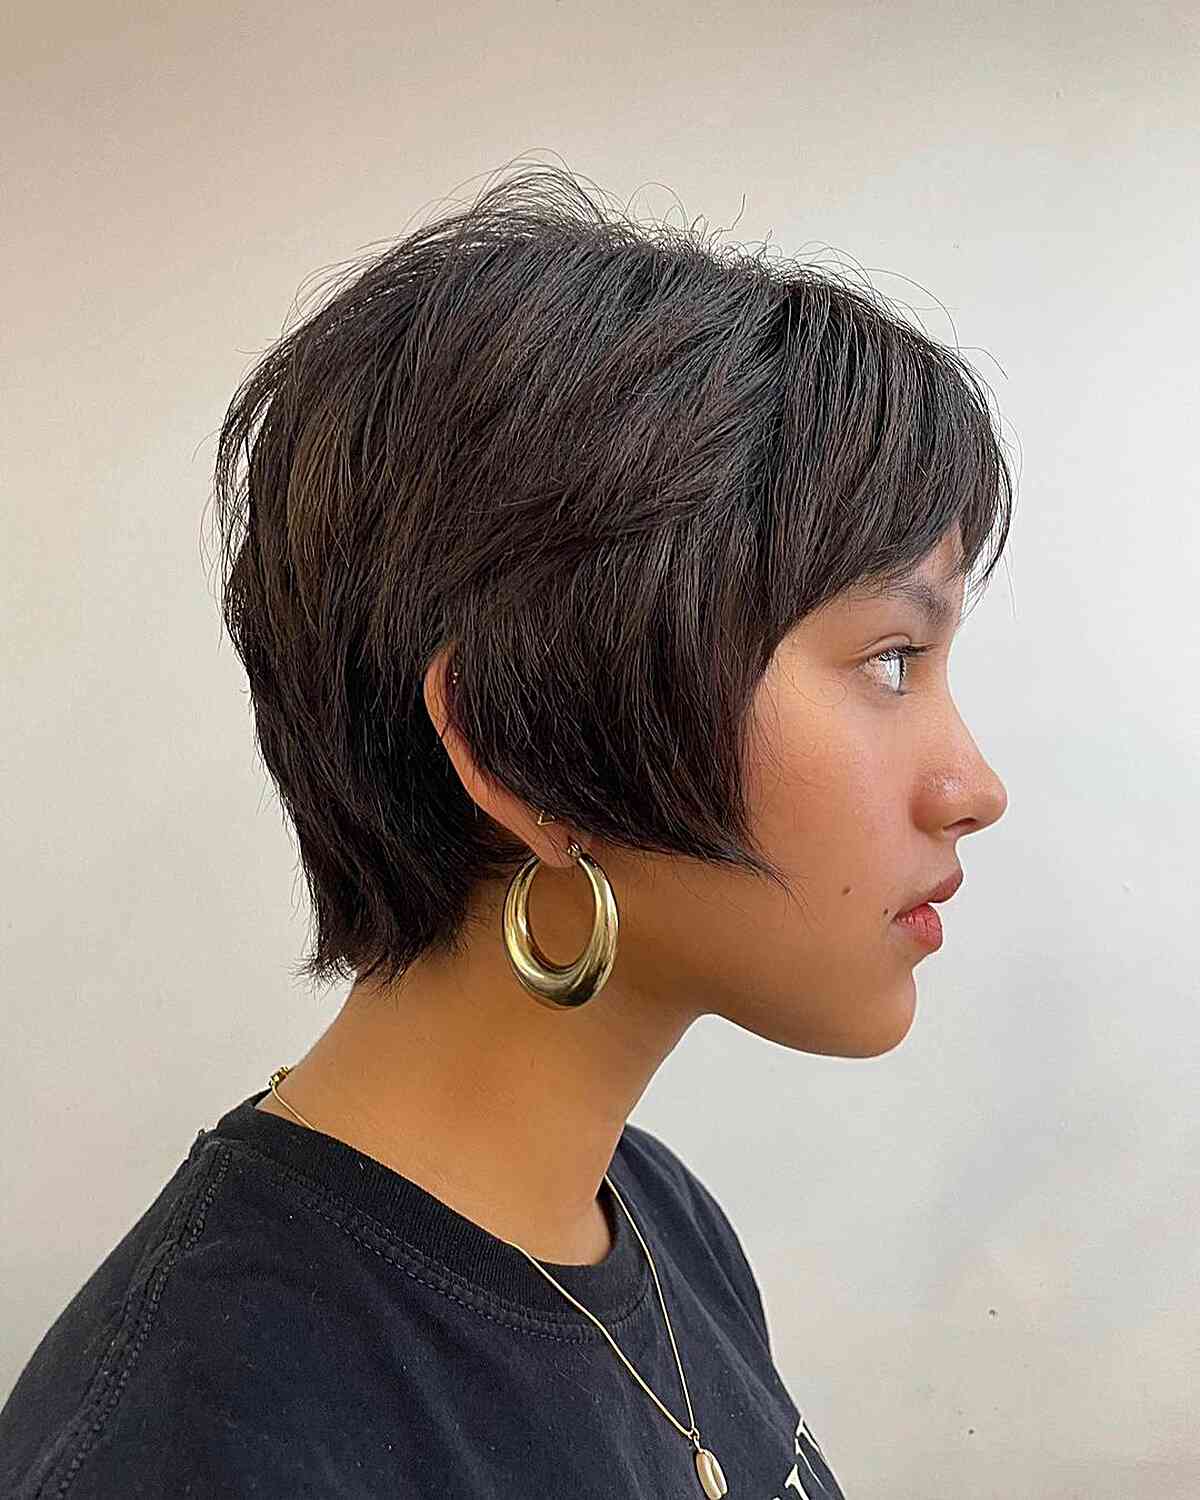 90s-Inspired Bixie Cut for ladies with thick hair